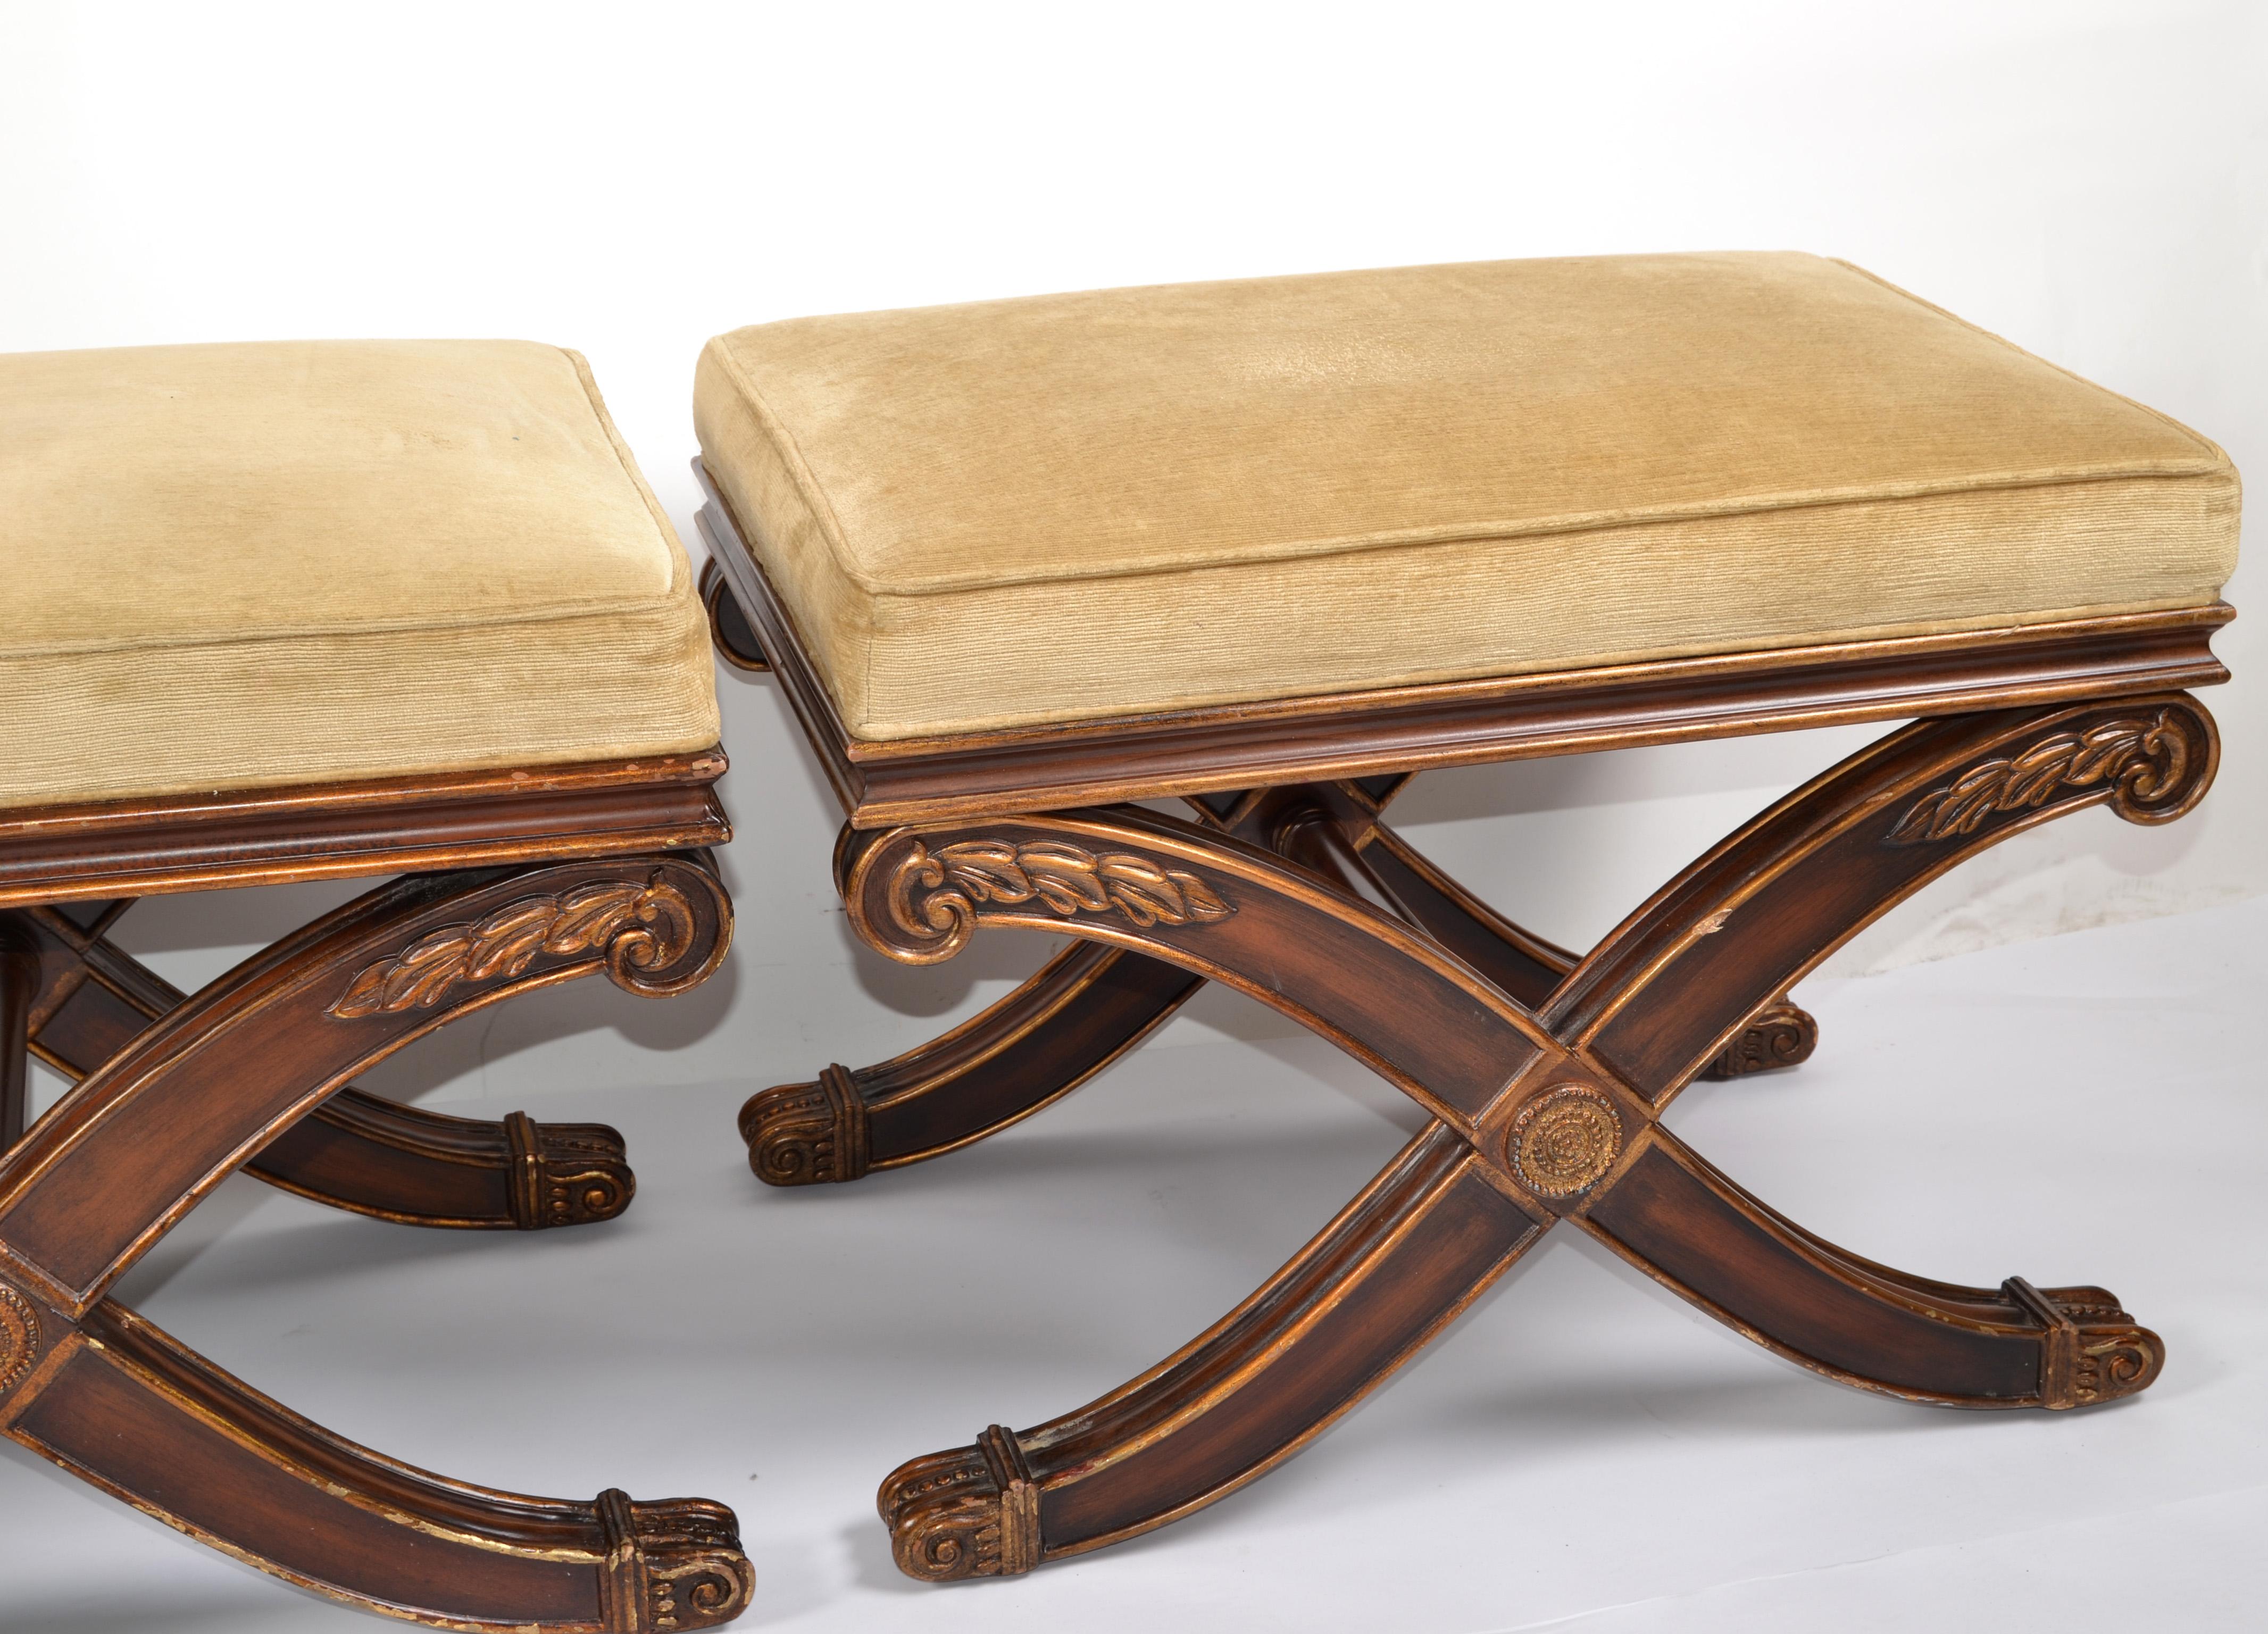 1 of 3 Neoclassical French Benches Stools Ottoman Regency X Based America In Good Condition For Sale In Miami, FL